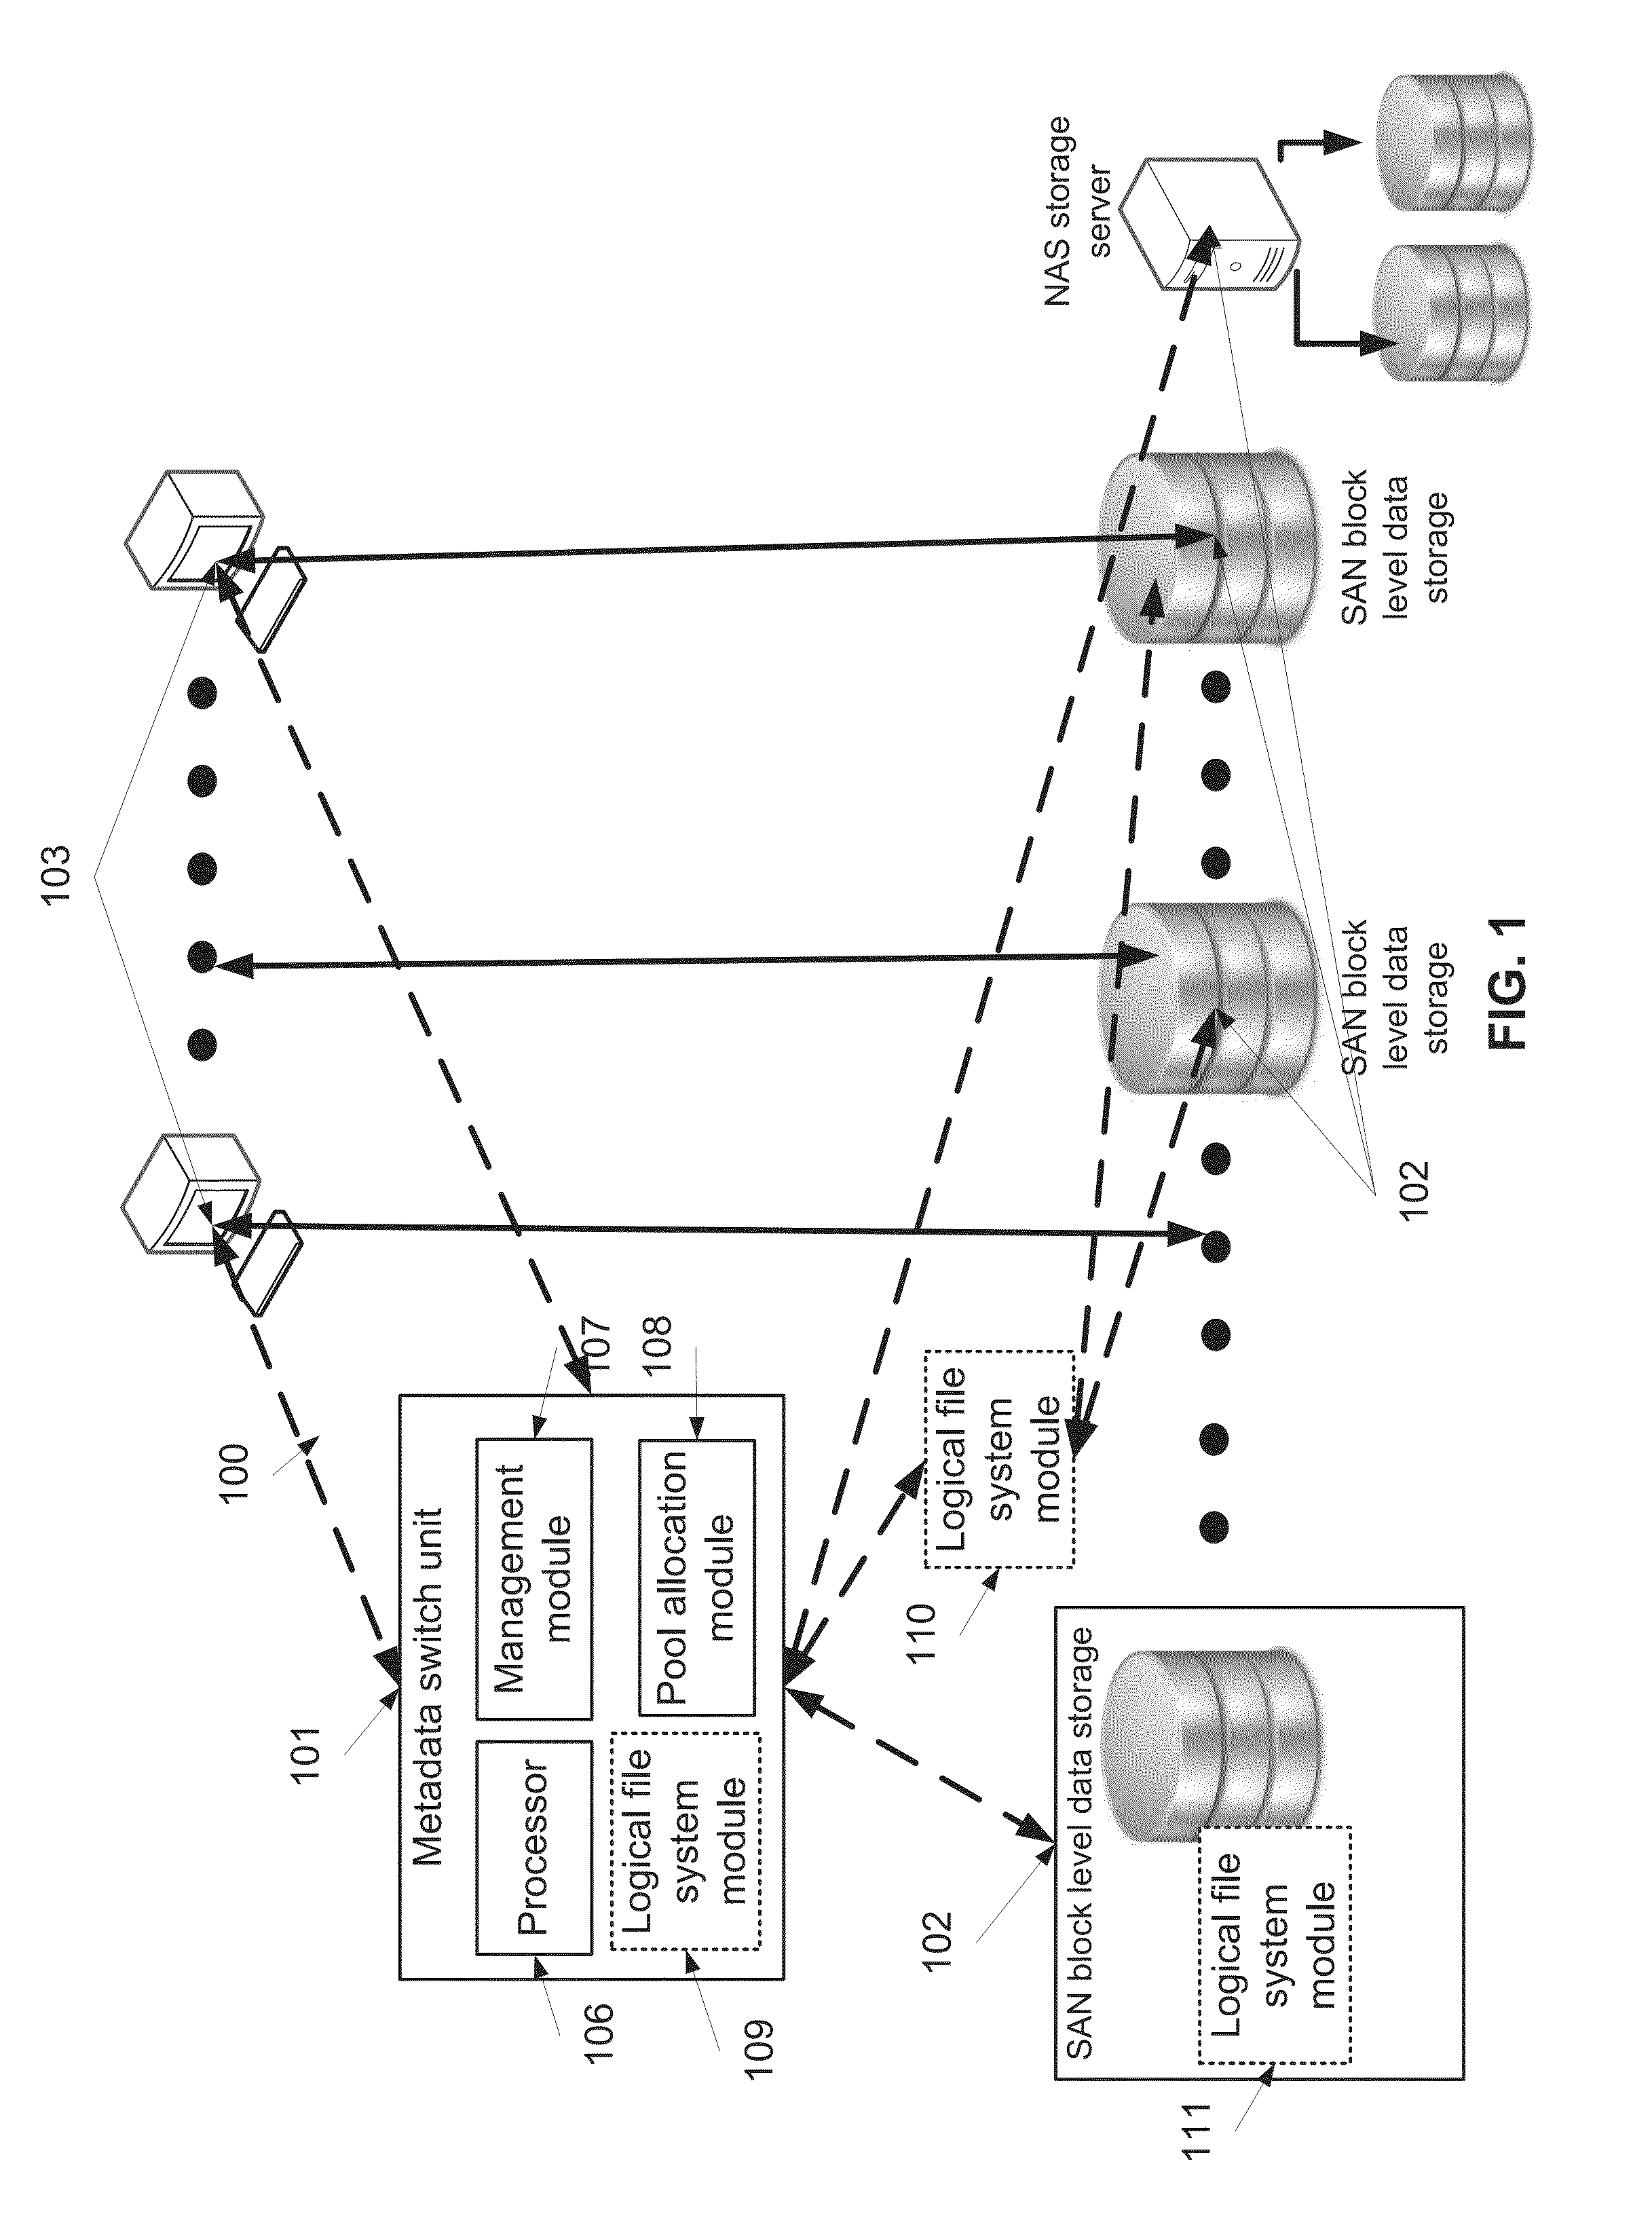 Managing objects stored in storage devices having a concurrent retrieval configuration